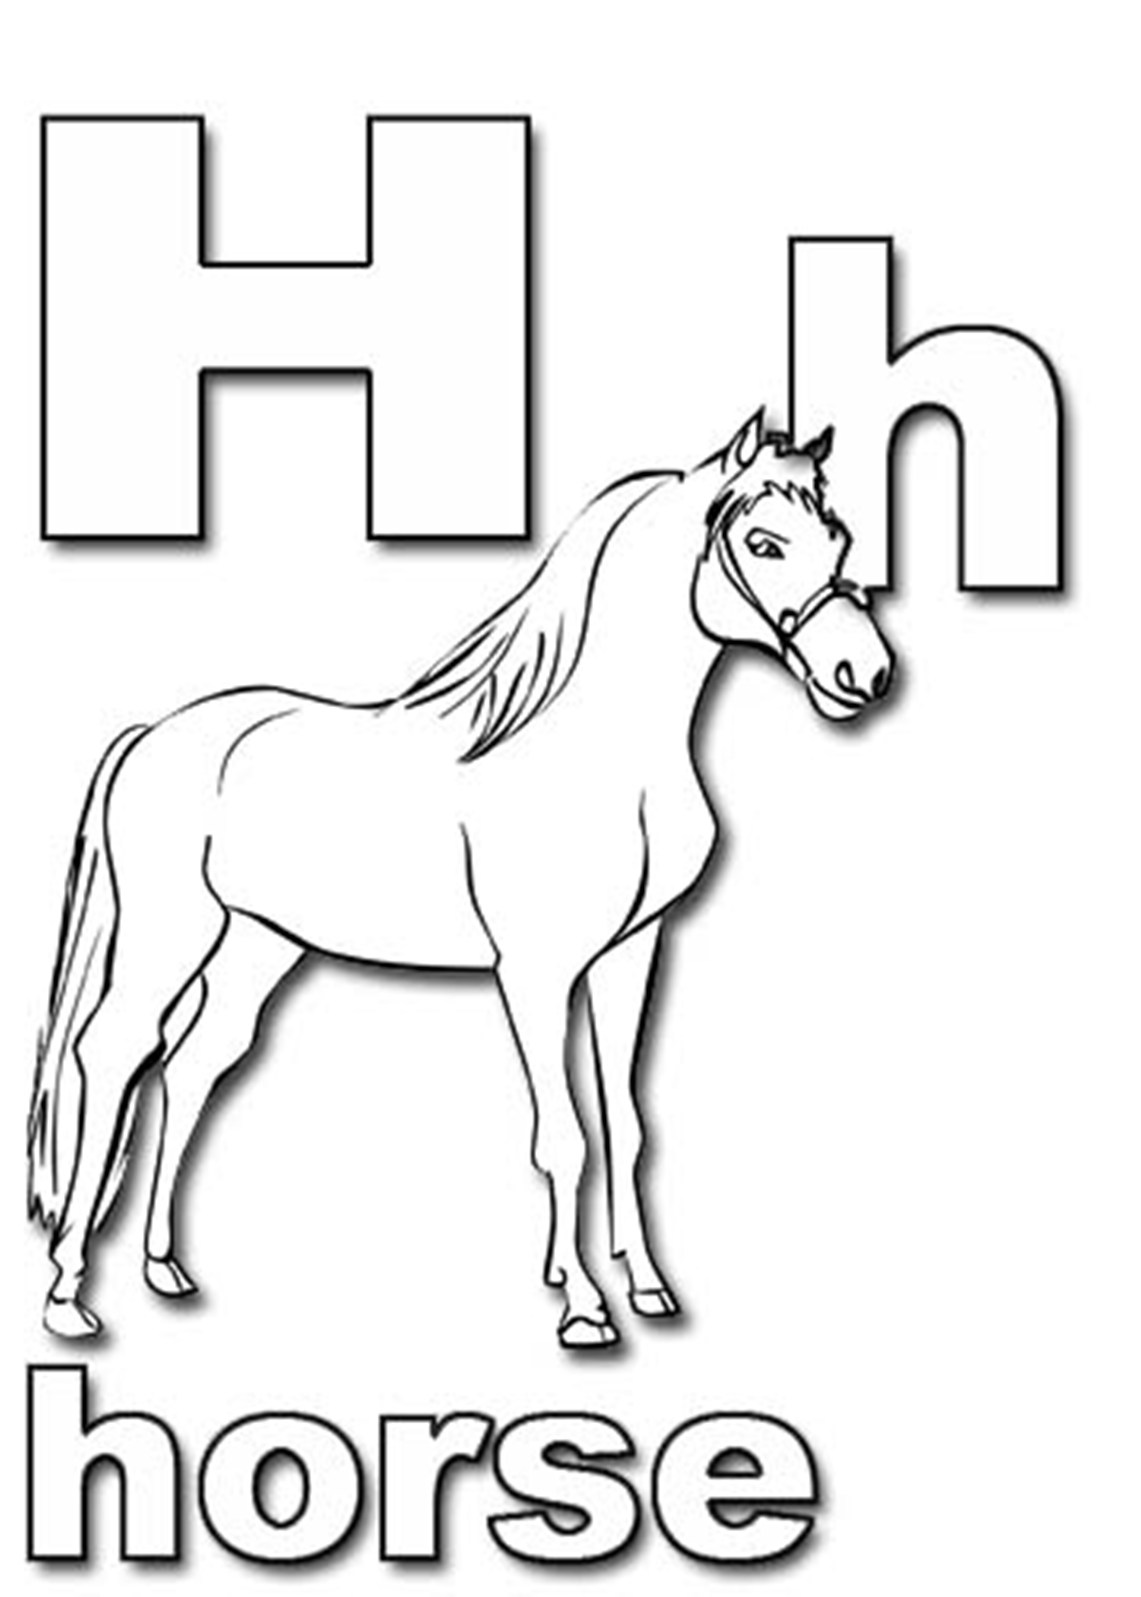 Horse Alphabet S Printablee6e4 Coloring Page